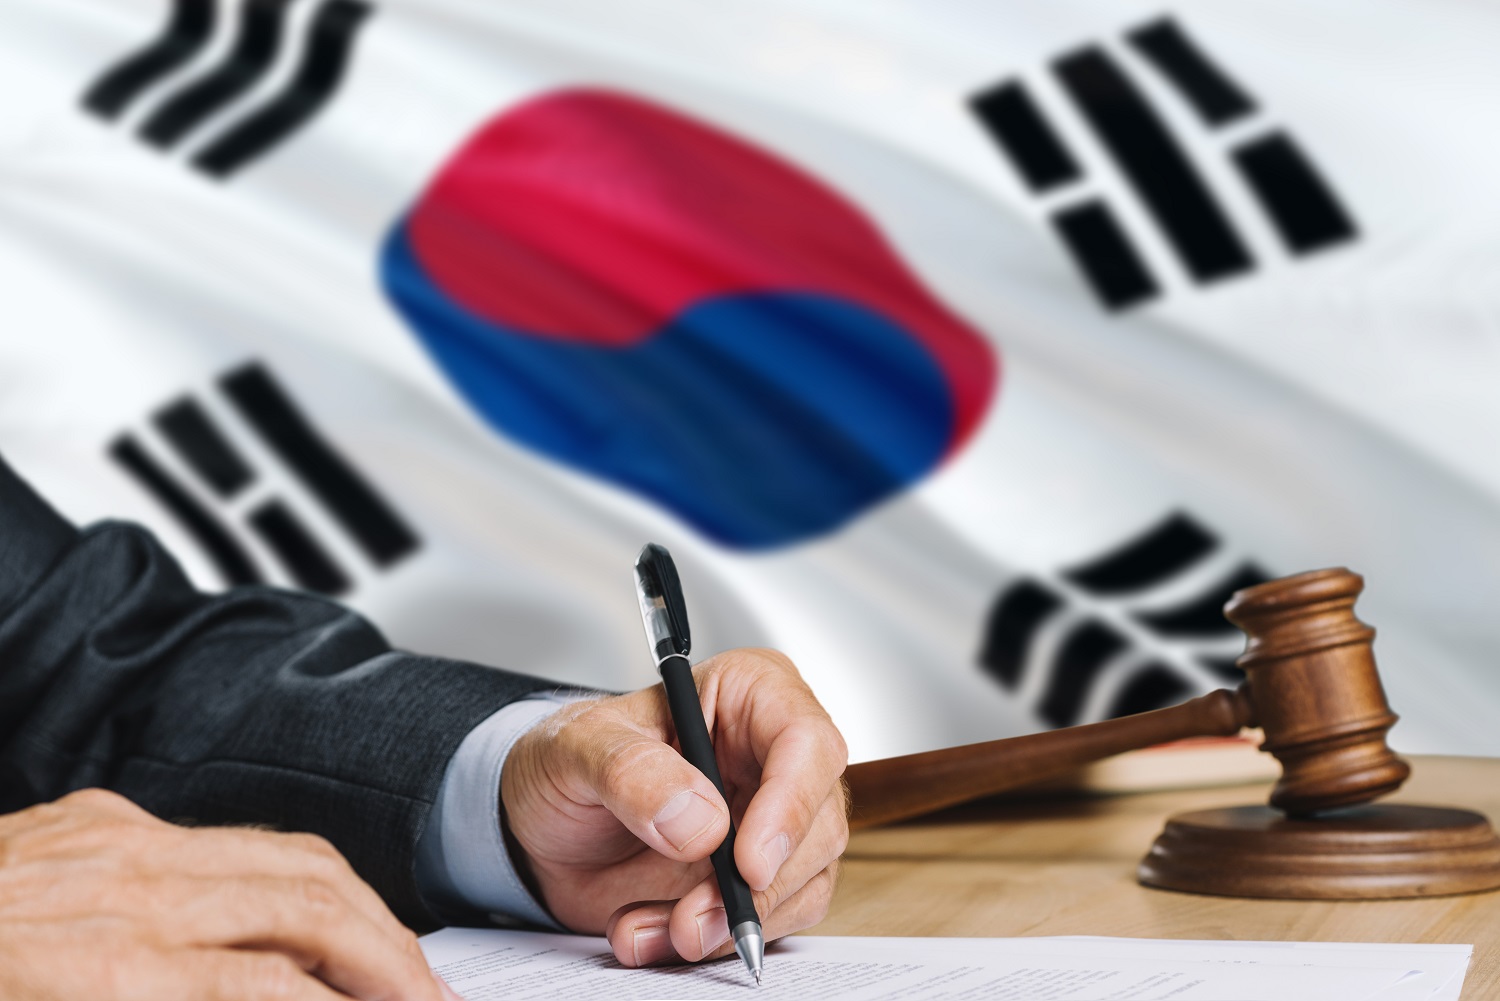 A man in a suit writes a document with a South Korean flag and a wooden gavel and block in the background.